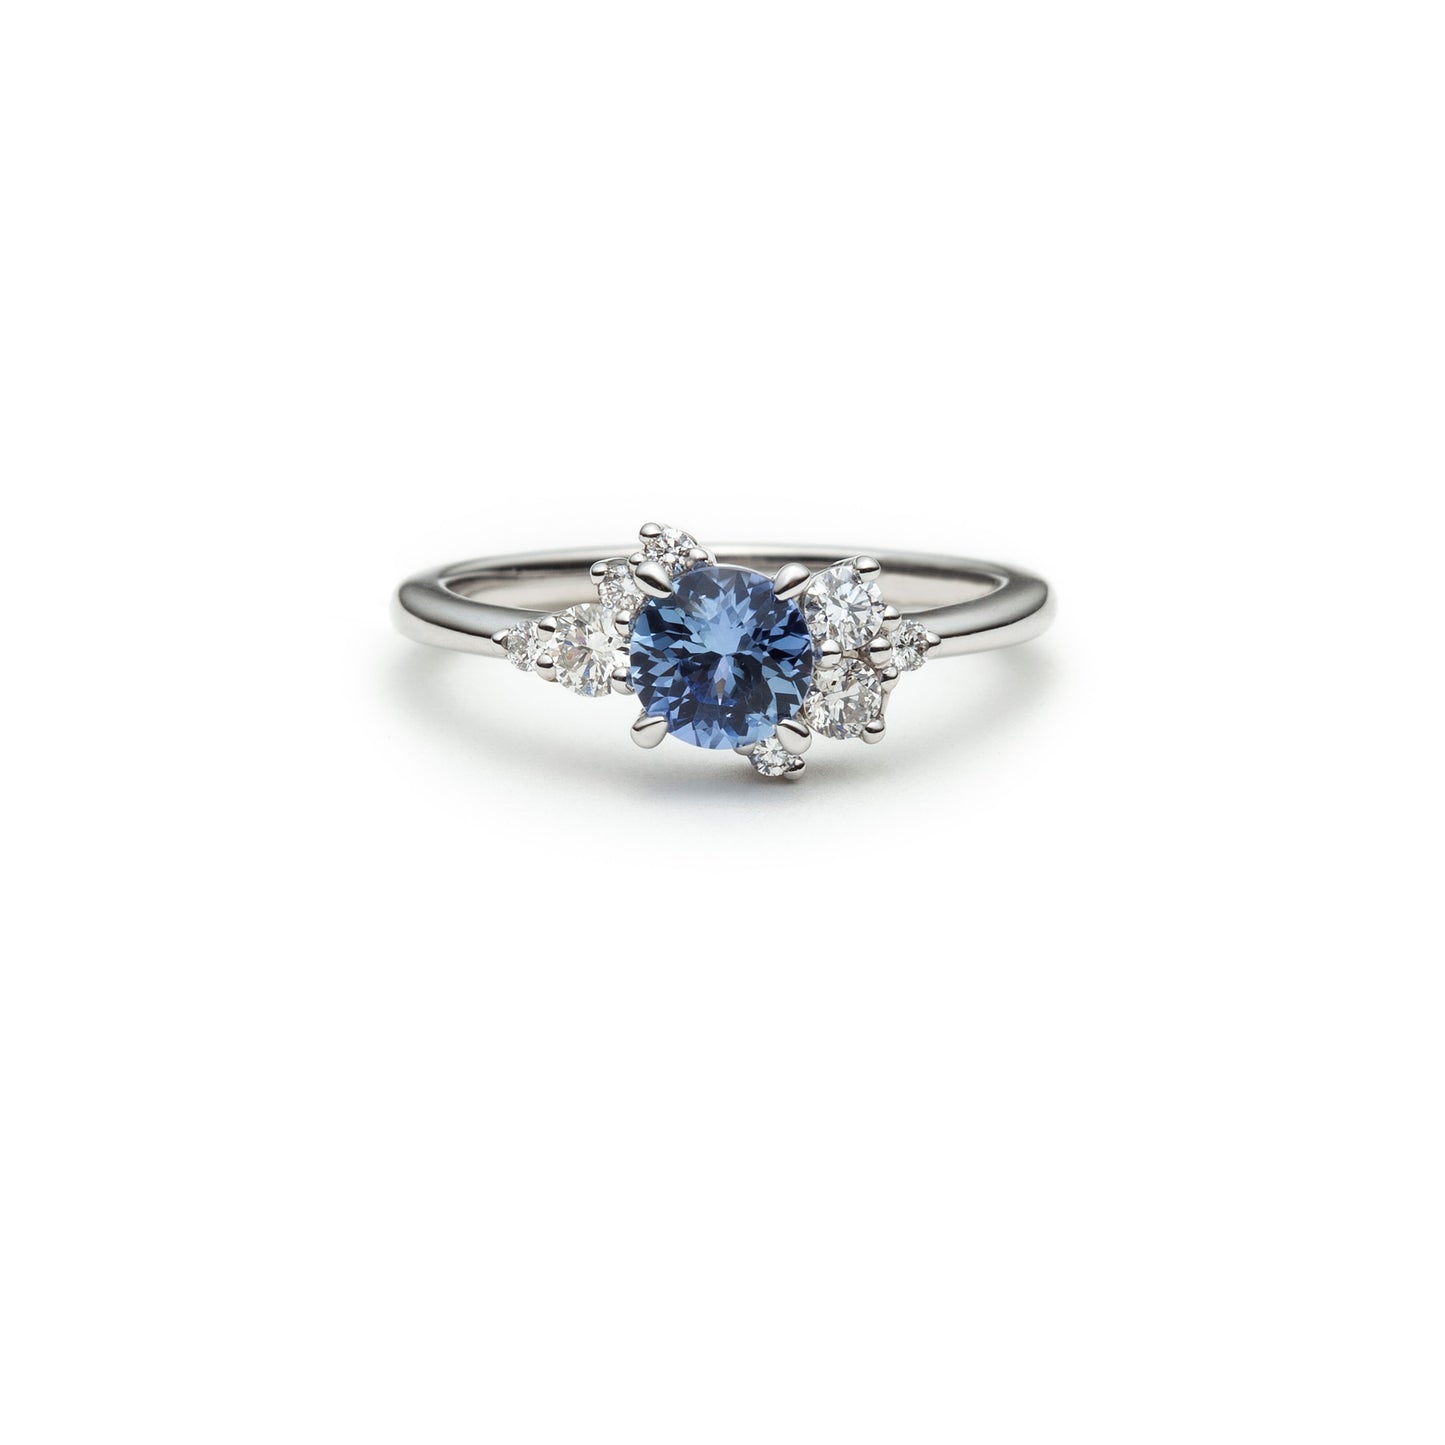 One of a kind light blue sapphire and diamond asymmetric ring